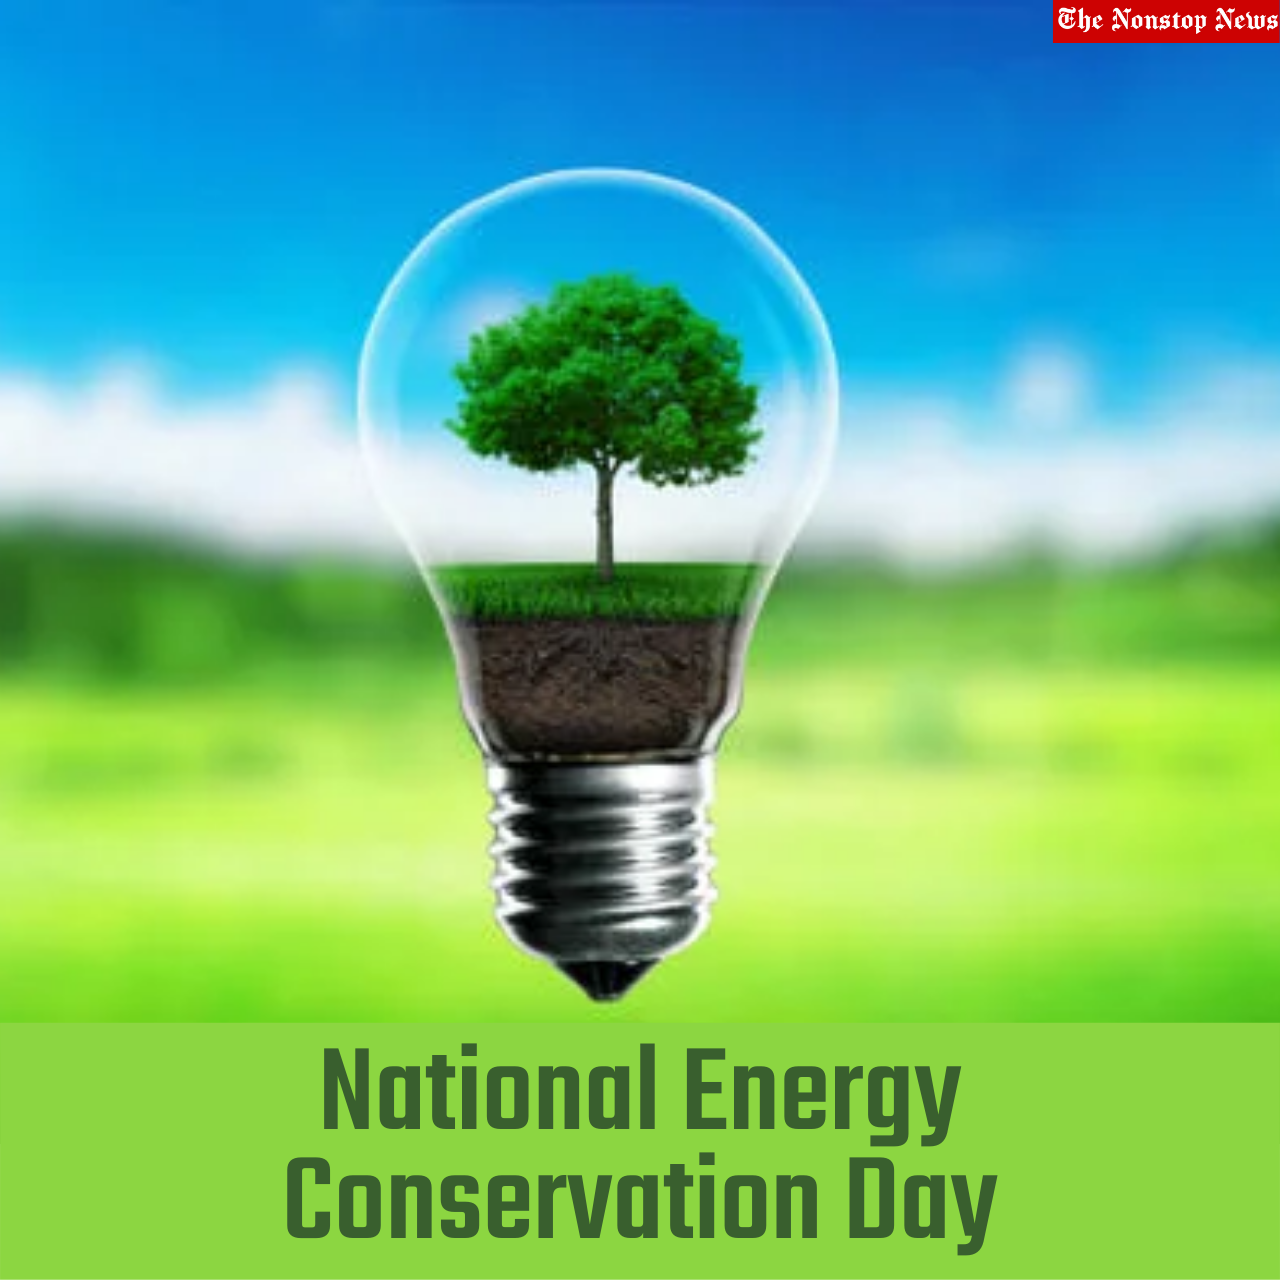 National Energy Conservation Day 2021 Quotes, HD Images, Messages, Poster, Slogans, and Drawing to create awareness